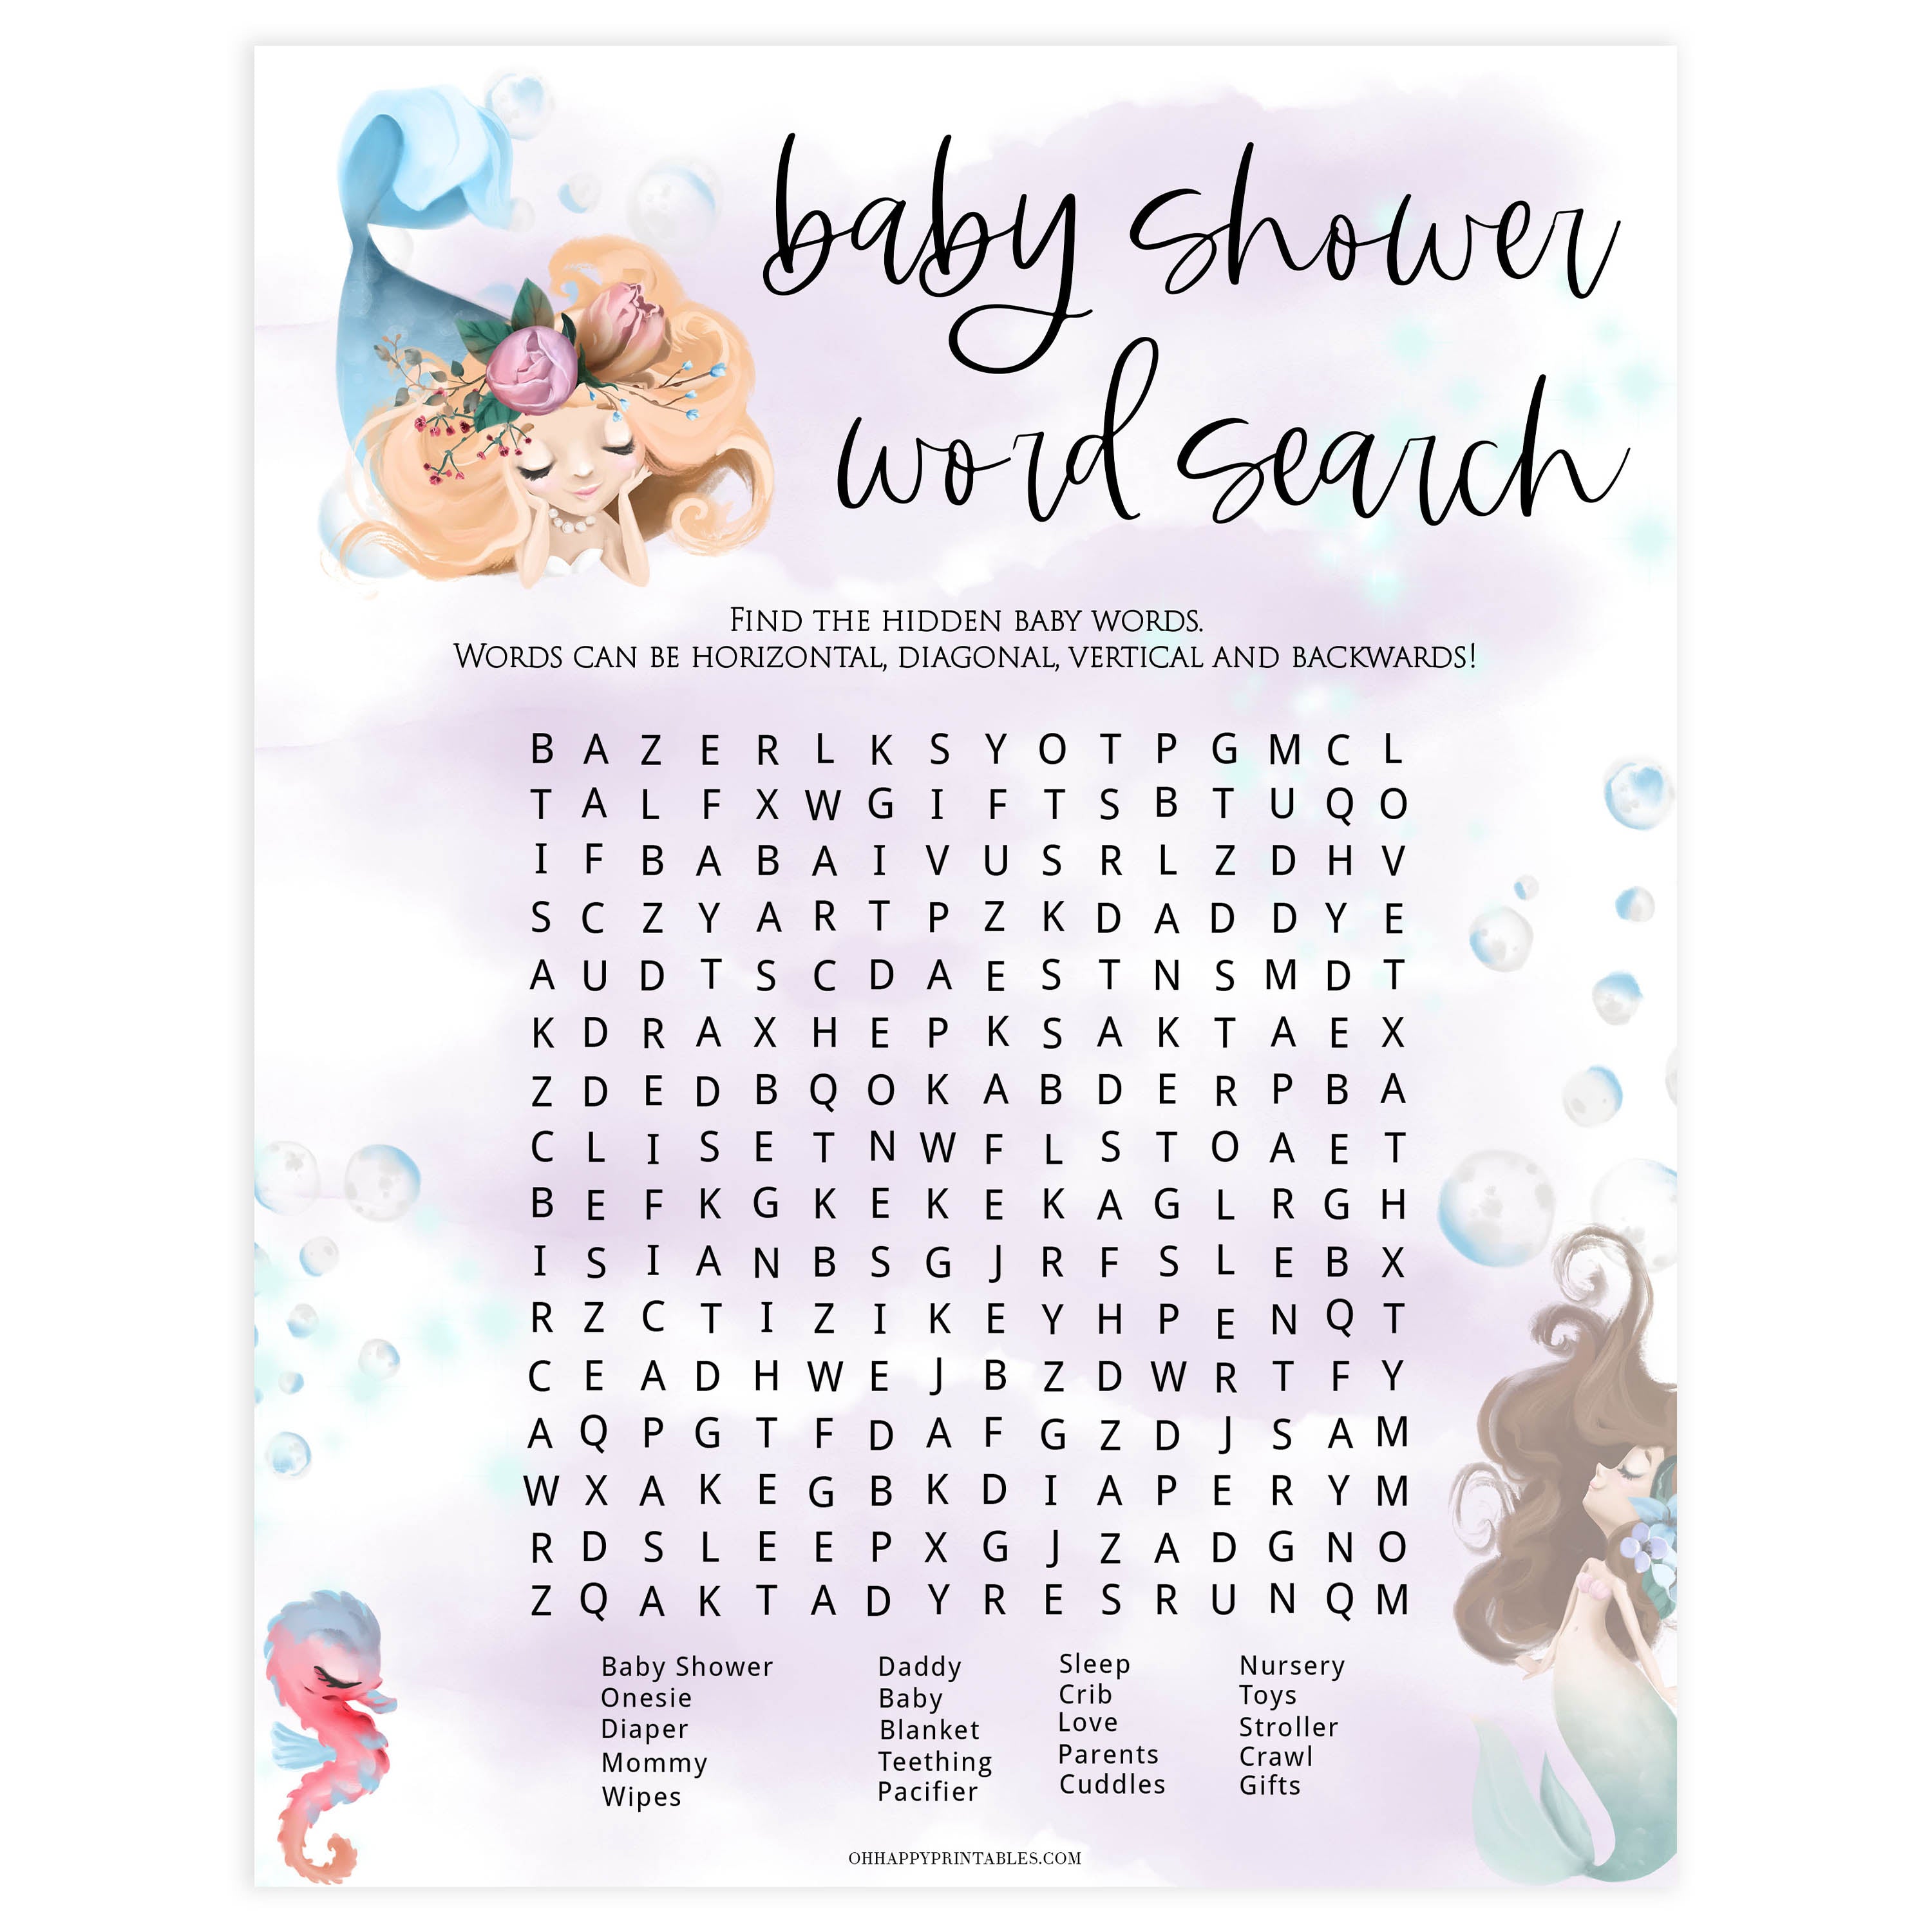 baby shower word search game, Printable baby shower games, little mermaid baby games, baby shower games, fun baby shower ideas, top baby shower ideas, little mermaid baby shower, baby shower games, pink hearts baby shower ideas